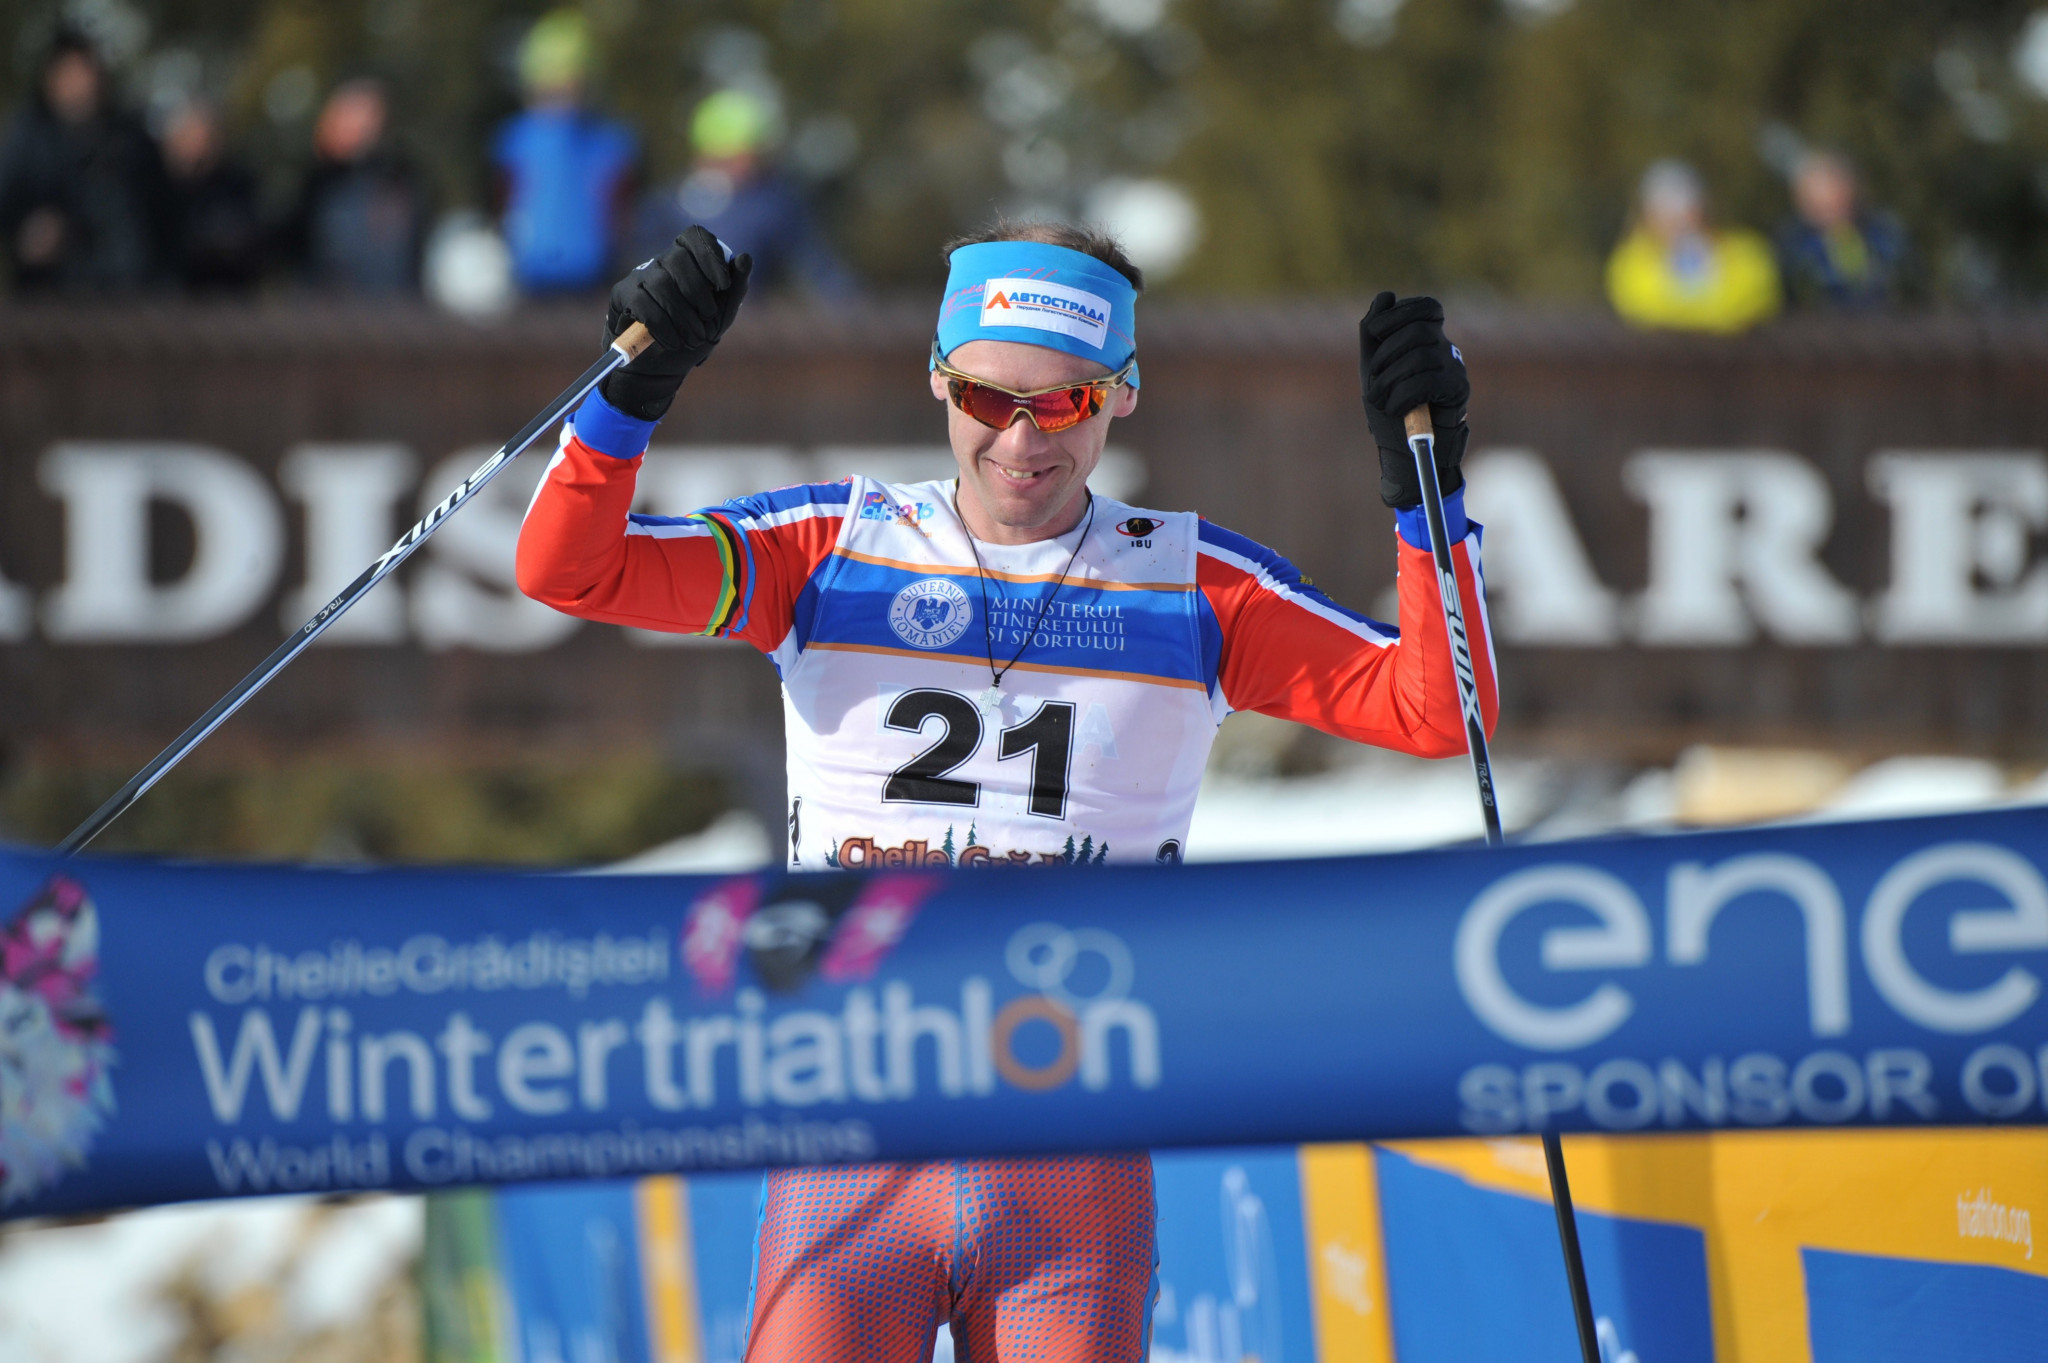 Russia's Pavel Andreev won the Winter Triathlon World Championships for a sixth time ©ITU